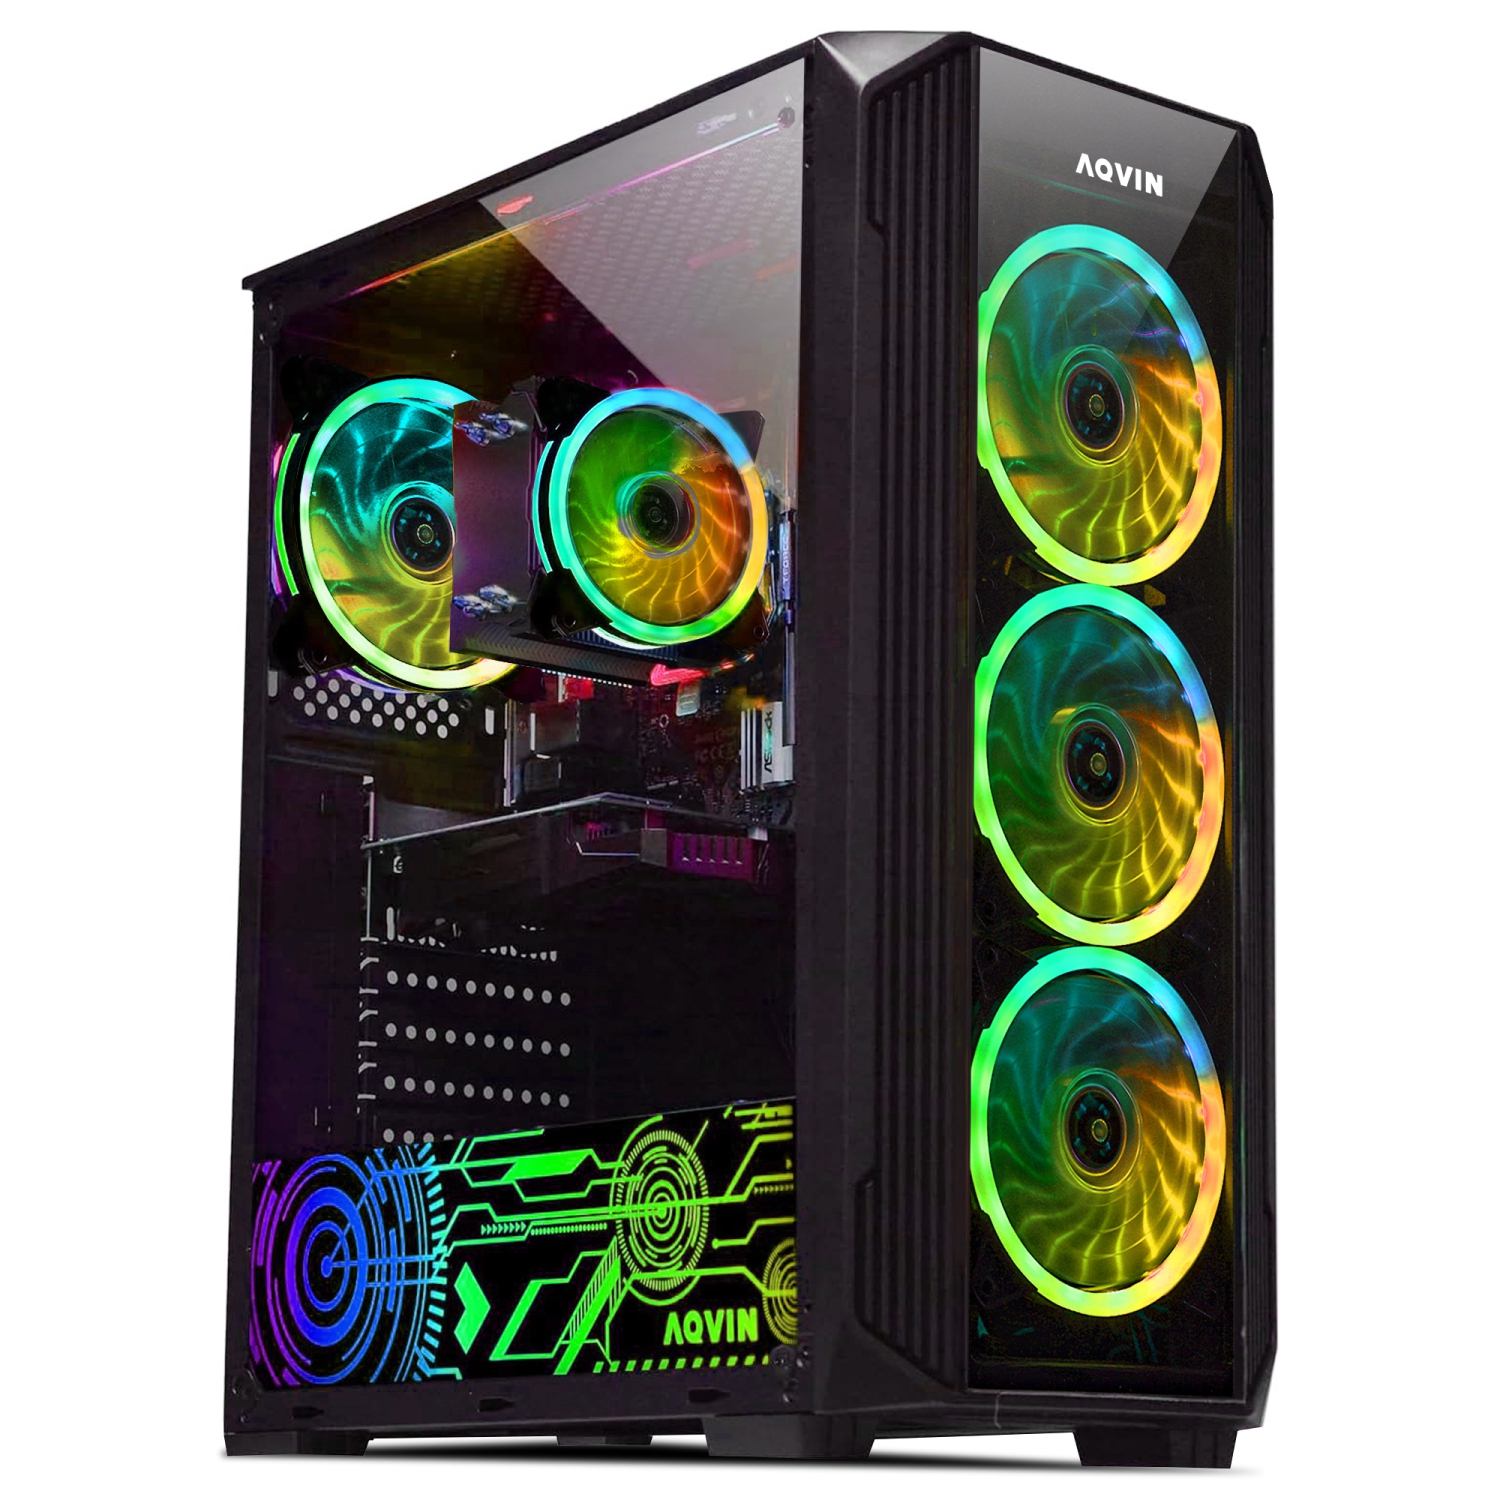 Refurbished (Excellent) - Prebuilt Gaming PC Tower Desktop | Intel Core i7 up to 4.0 GHz | NVIDIA GTX 1650 4GB GDDR5 Gaming Card | 1 TB SSD | 32 GB DDR4 RAM | Win 10 Pro | WiFi